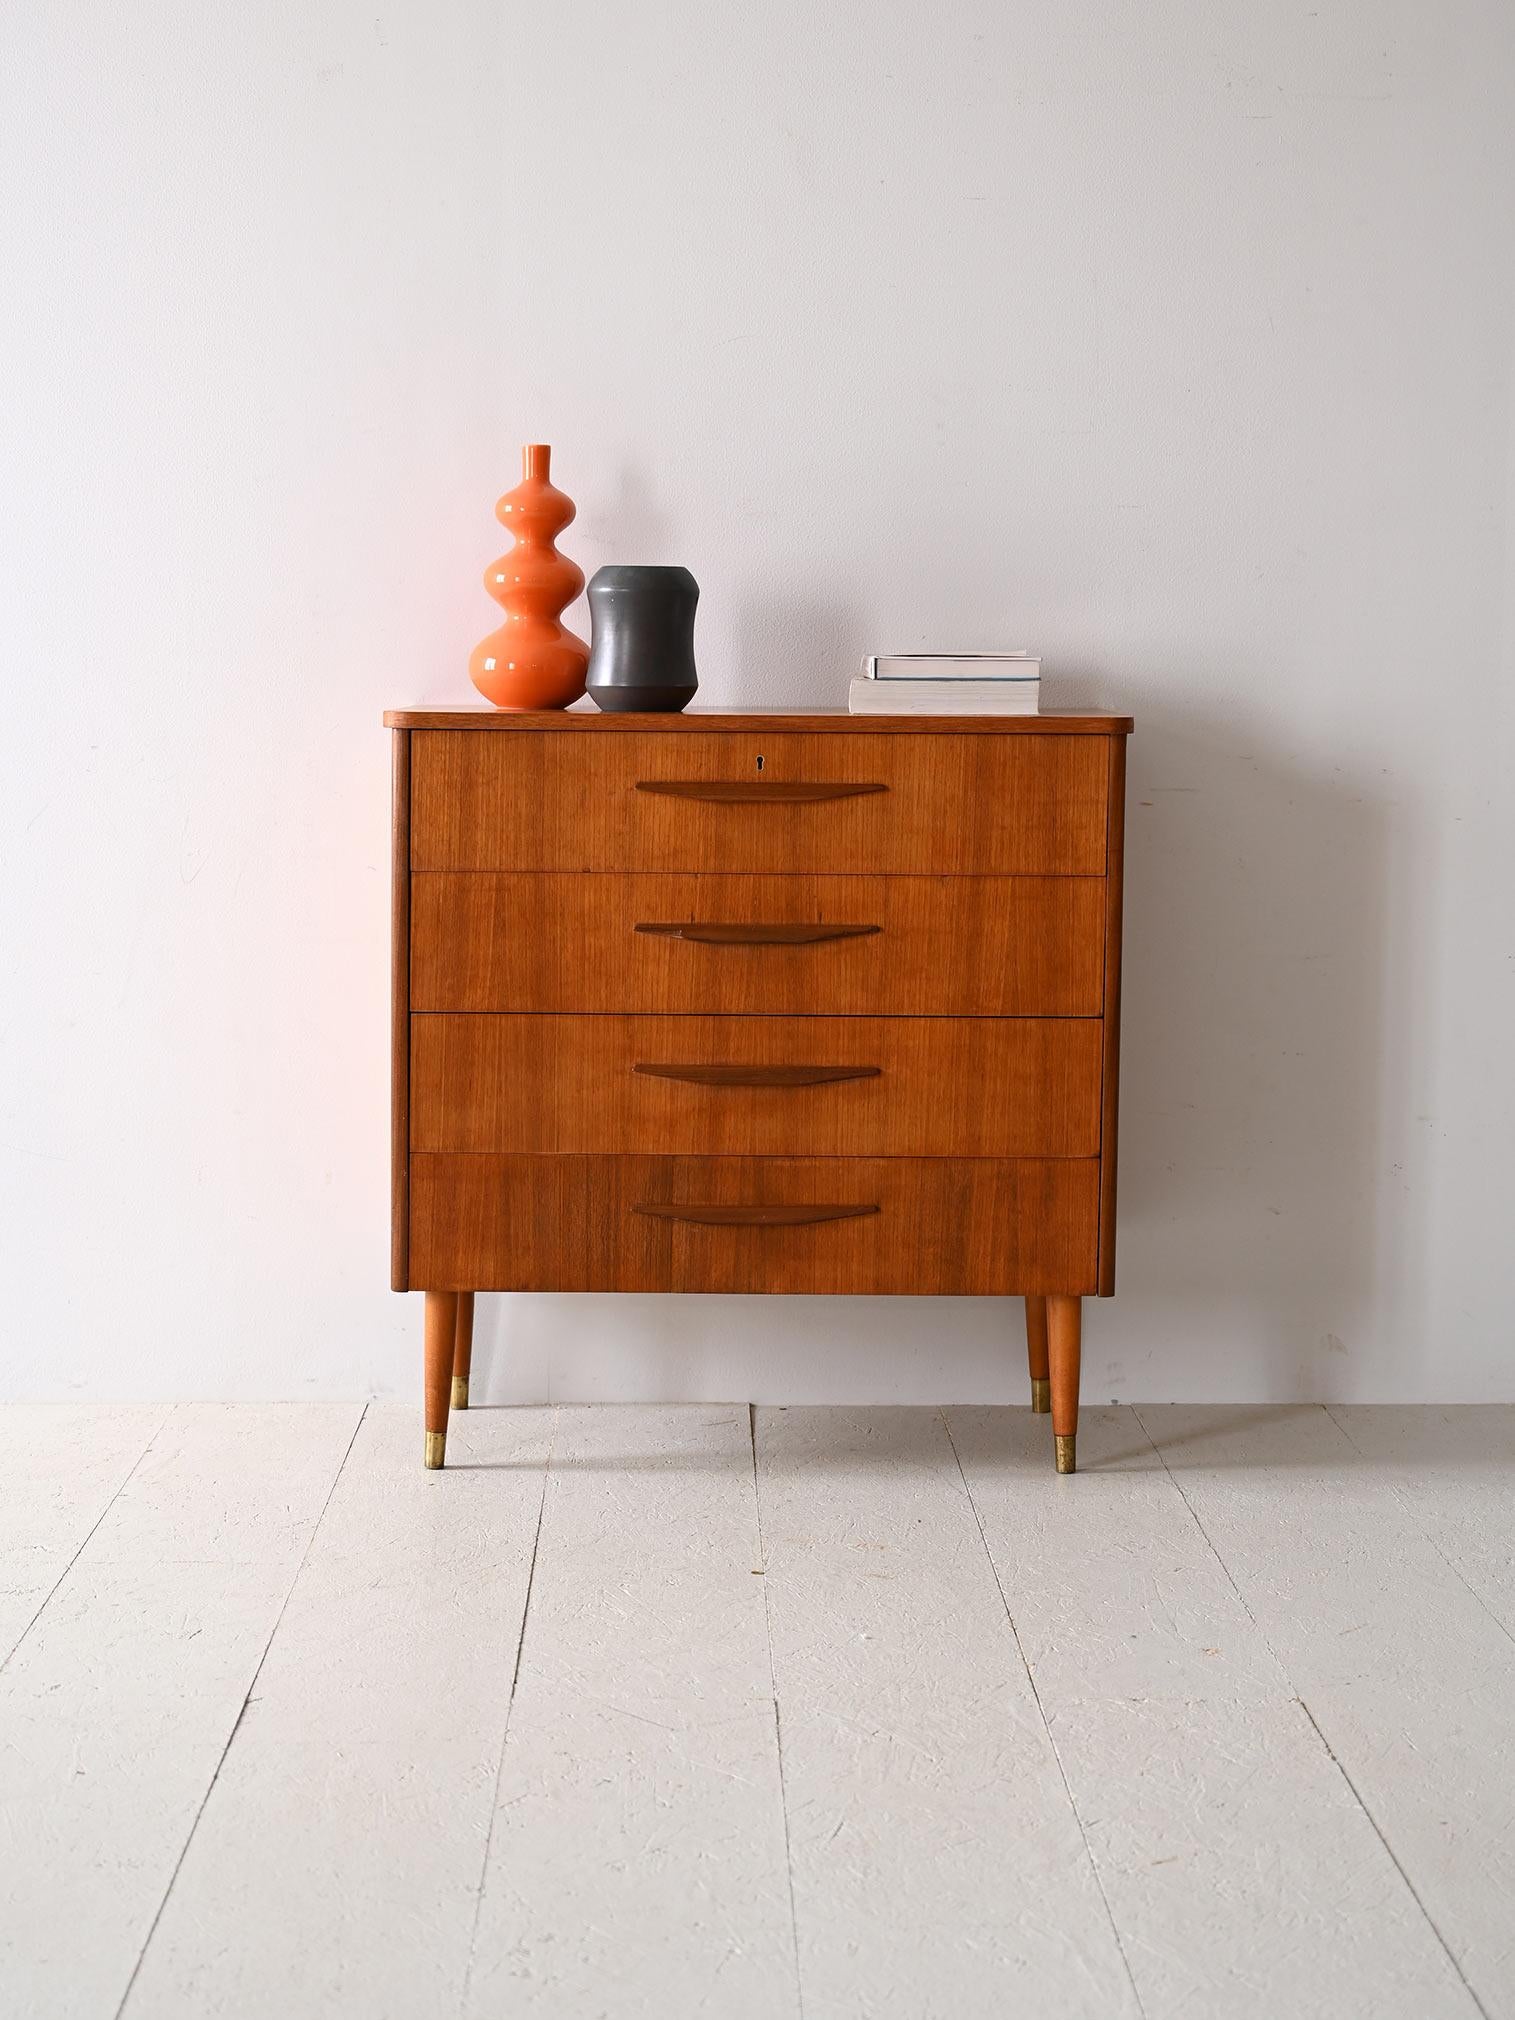 Scandinavian cabinet with 4 drawers and brass ferrule.

This teak-framed one embodies the functionality and elegant design typical of the mid-century period. The 'wooden handle of the drawers, a distinctive feature of the cabinet, enhances its